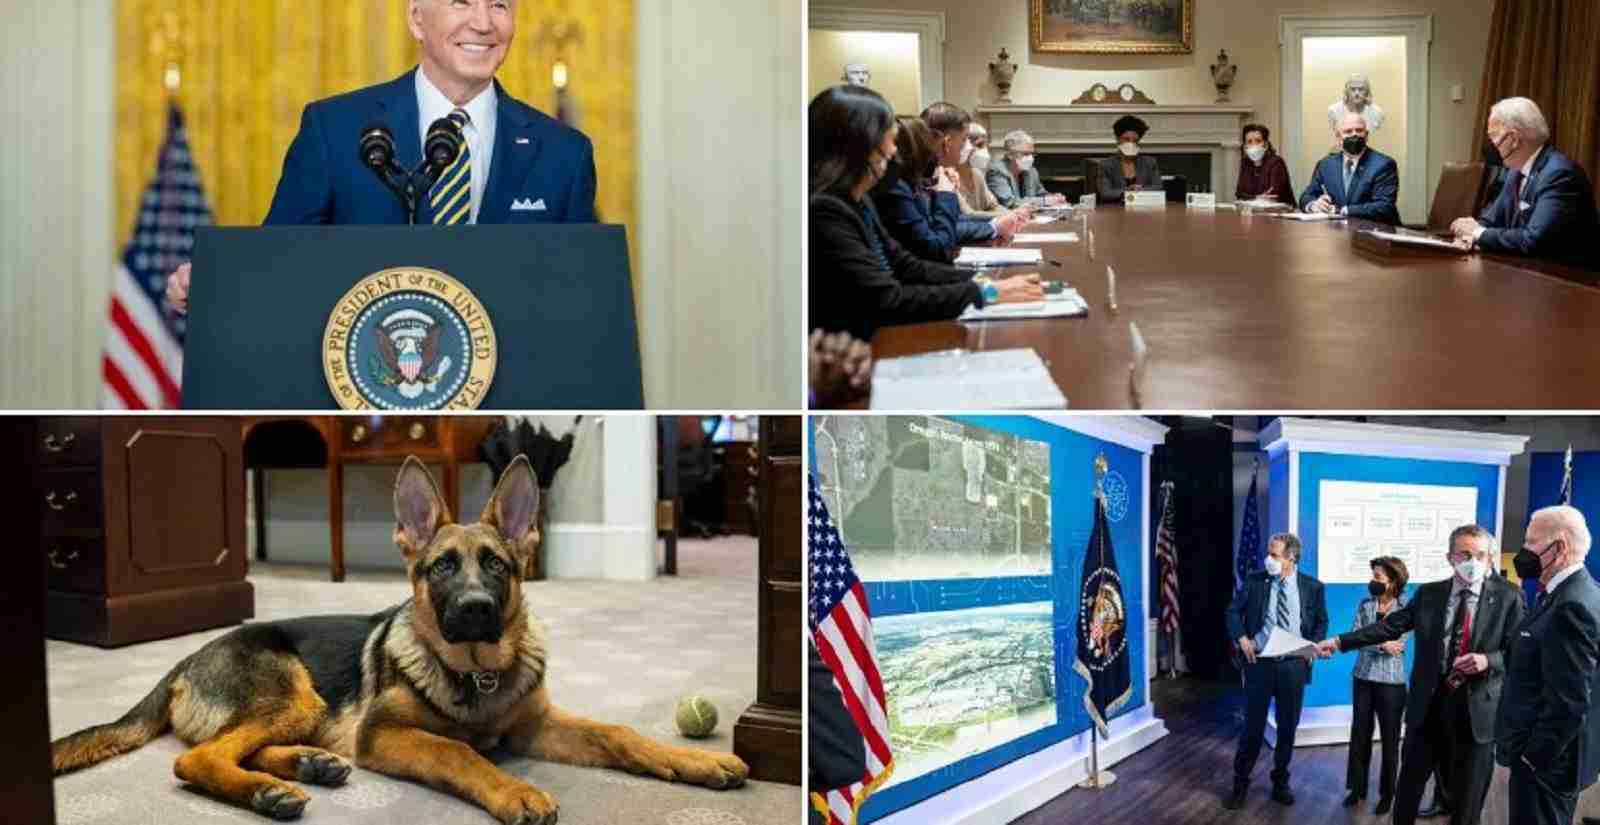 Dog visiting Oval Office seen as a highlight of the week for White House